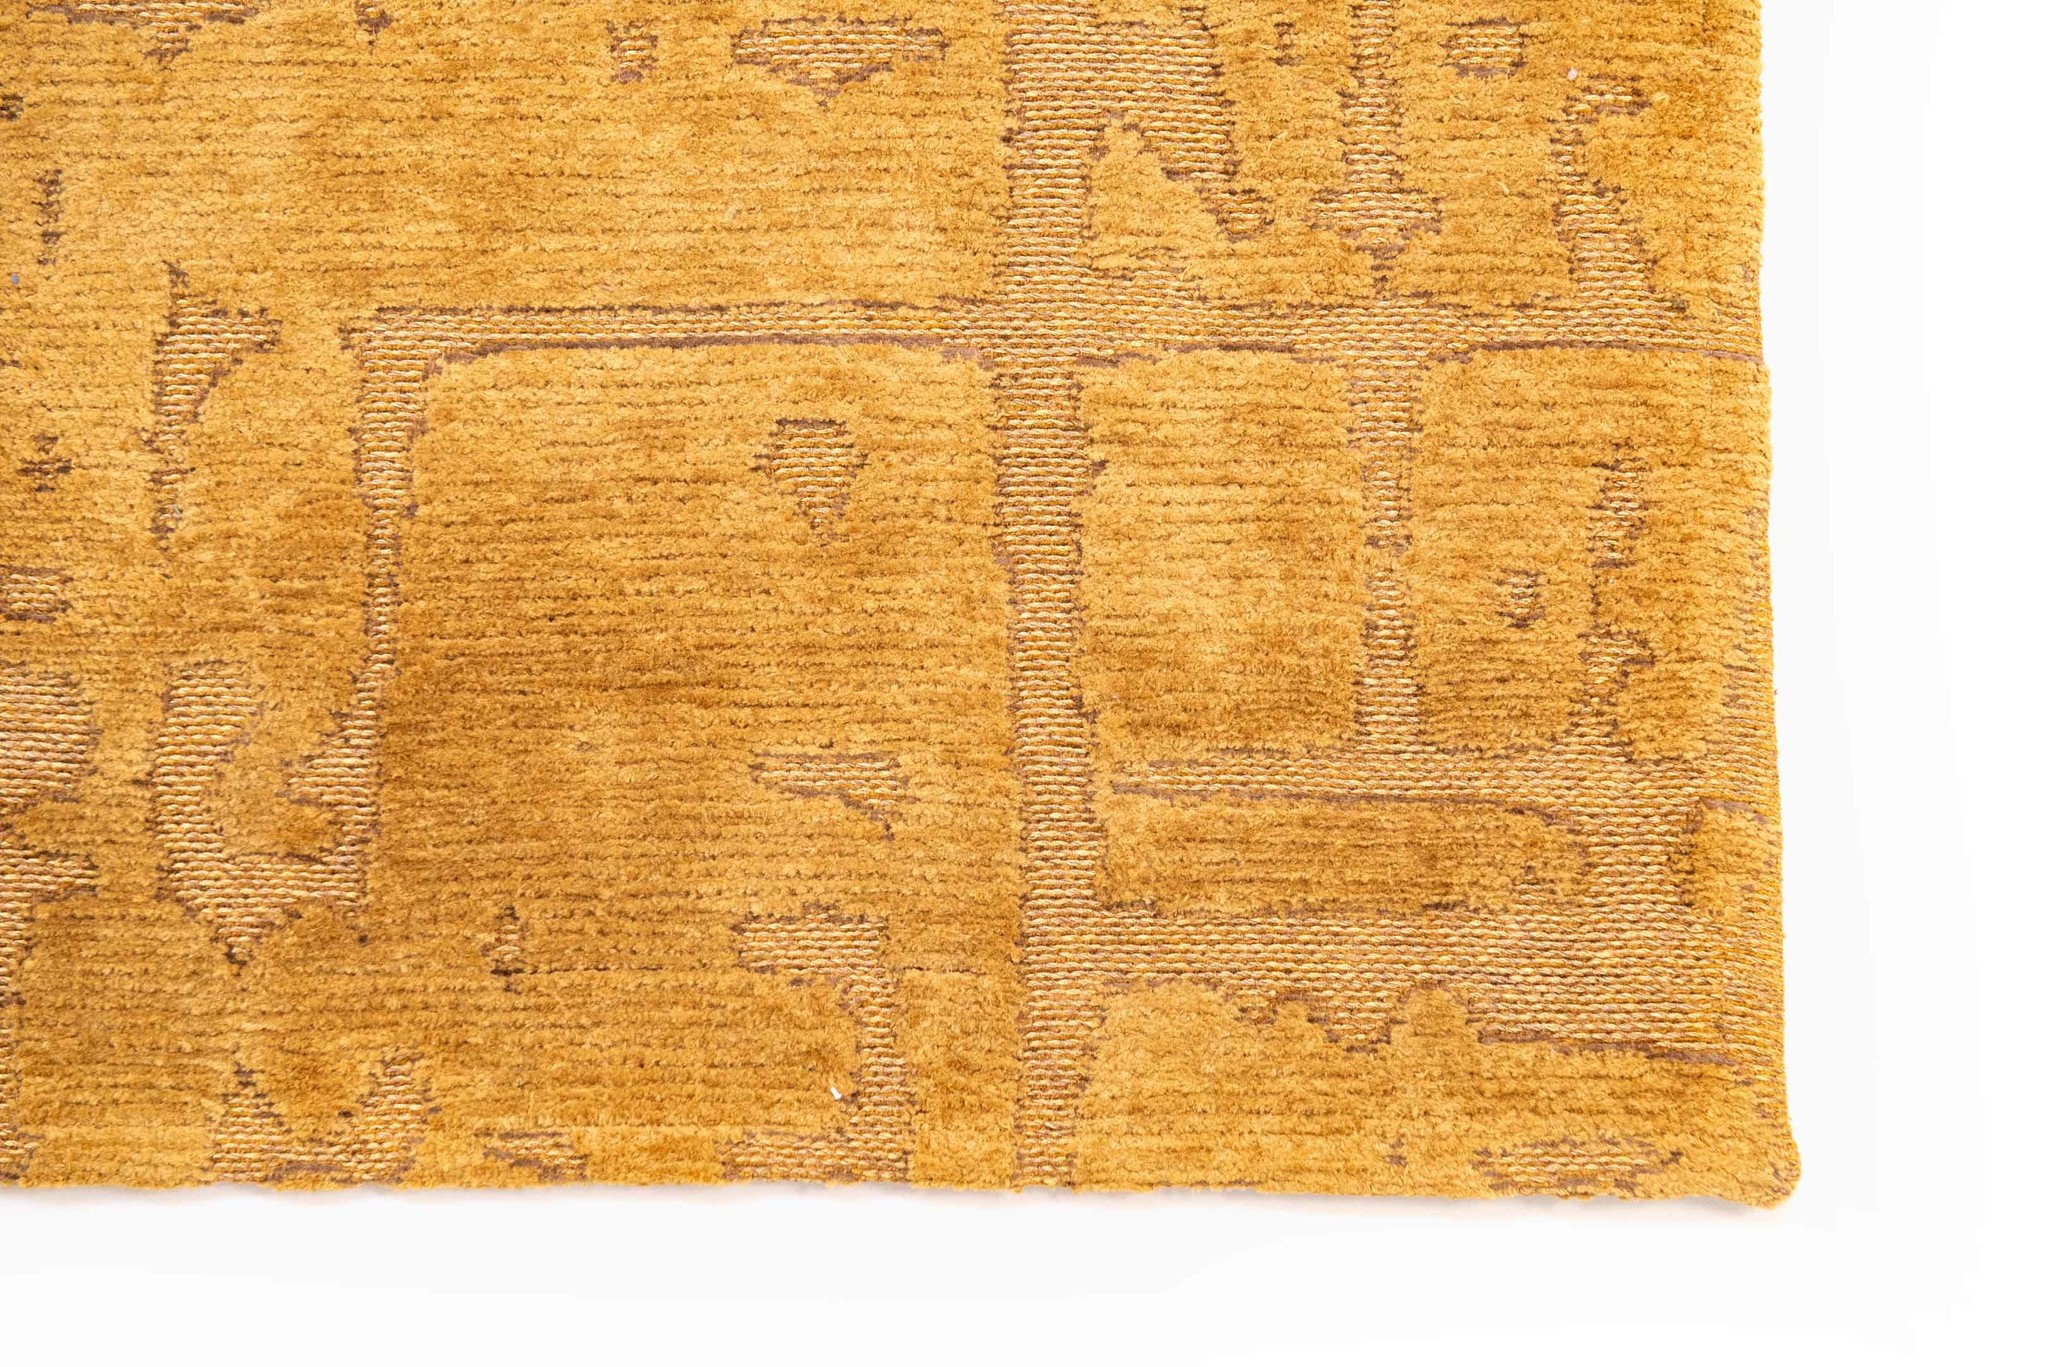 Abstract Gold Belgian Rug ☞ Size: 5' 7" x 8' (170 x 240 cm)